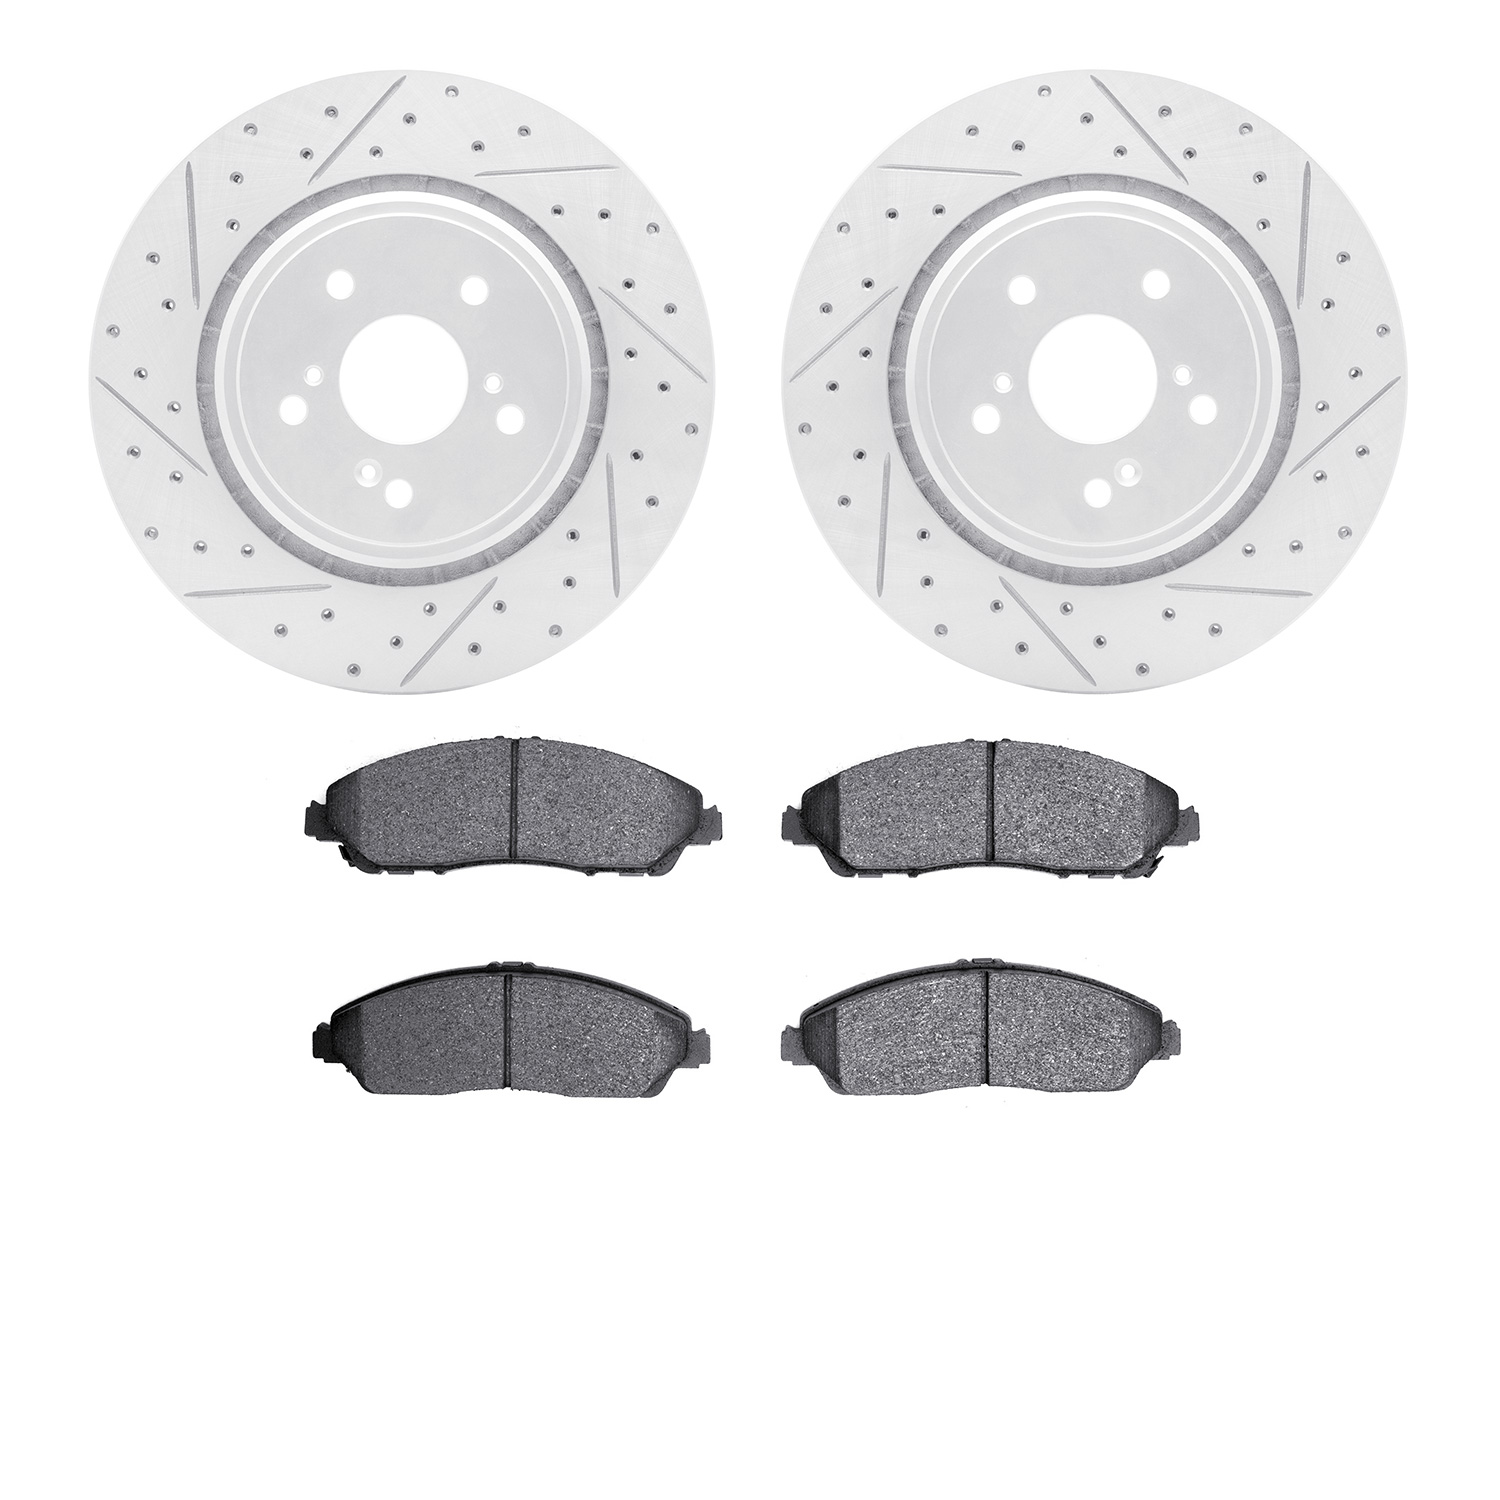 2502-58022 Geoperformance Drilled/Slotted Rotors w/5000 Advanced Brake Pads Kit, 2014-2016 Acura/Honda, Position: Front